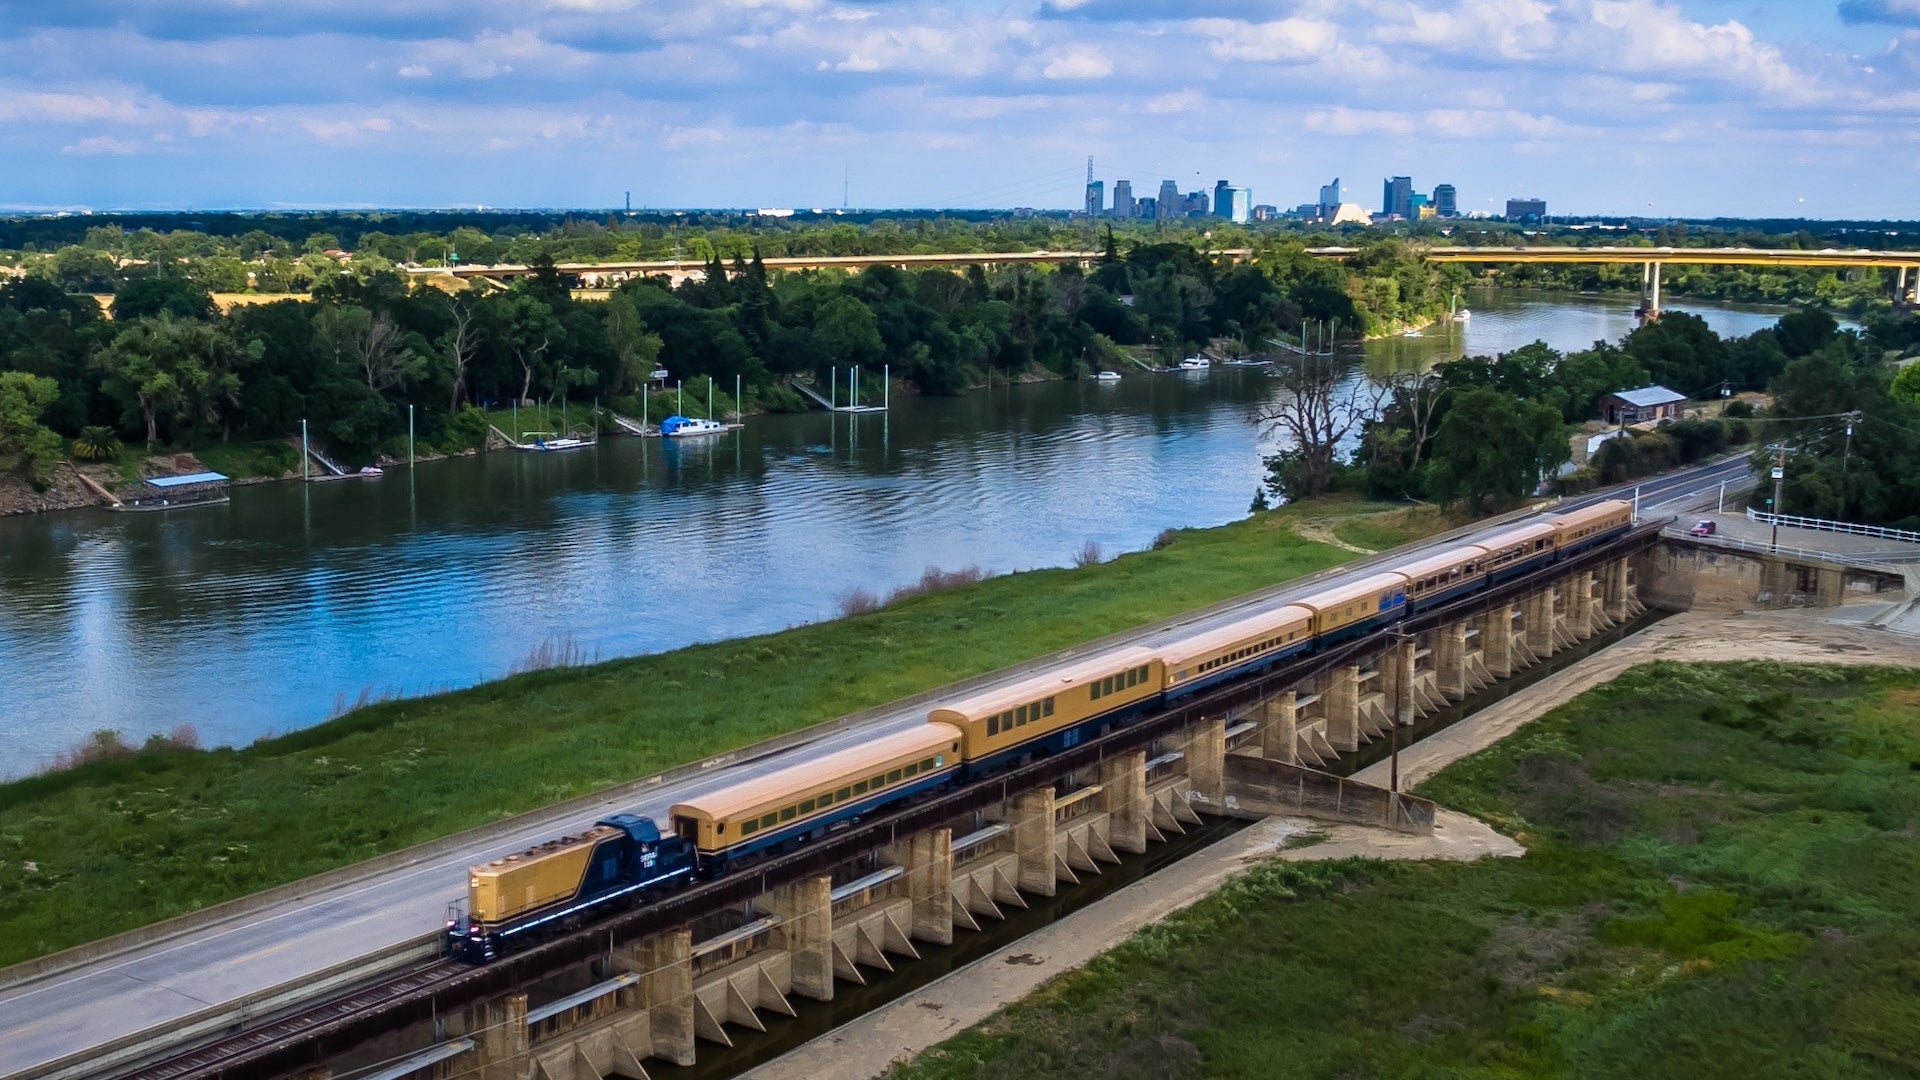 Aerial shot of a train moving next to a river with a city in the background